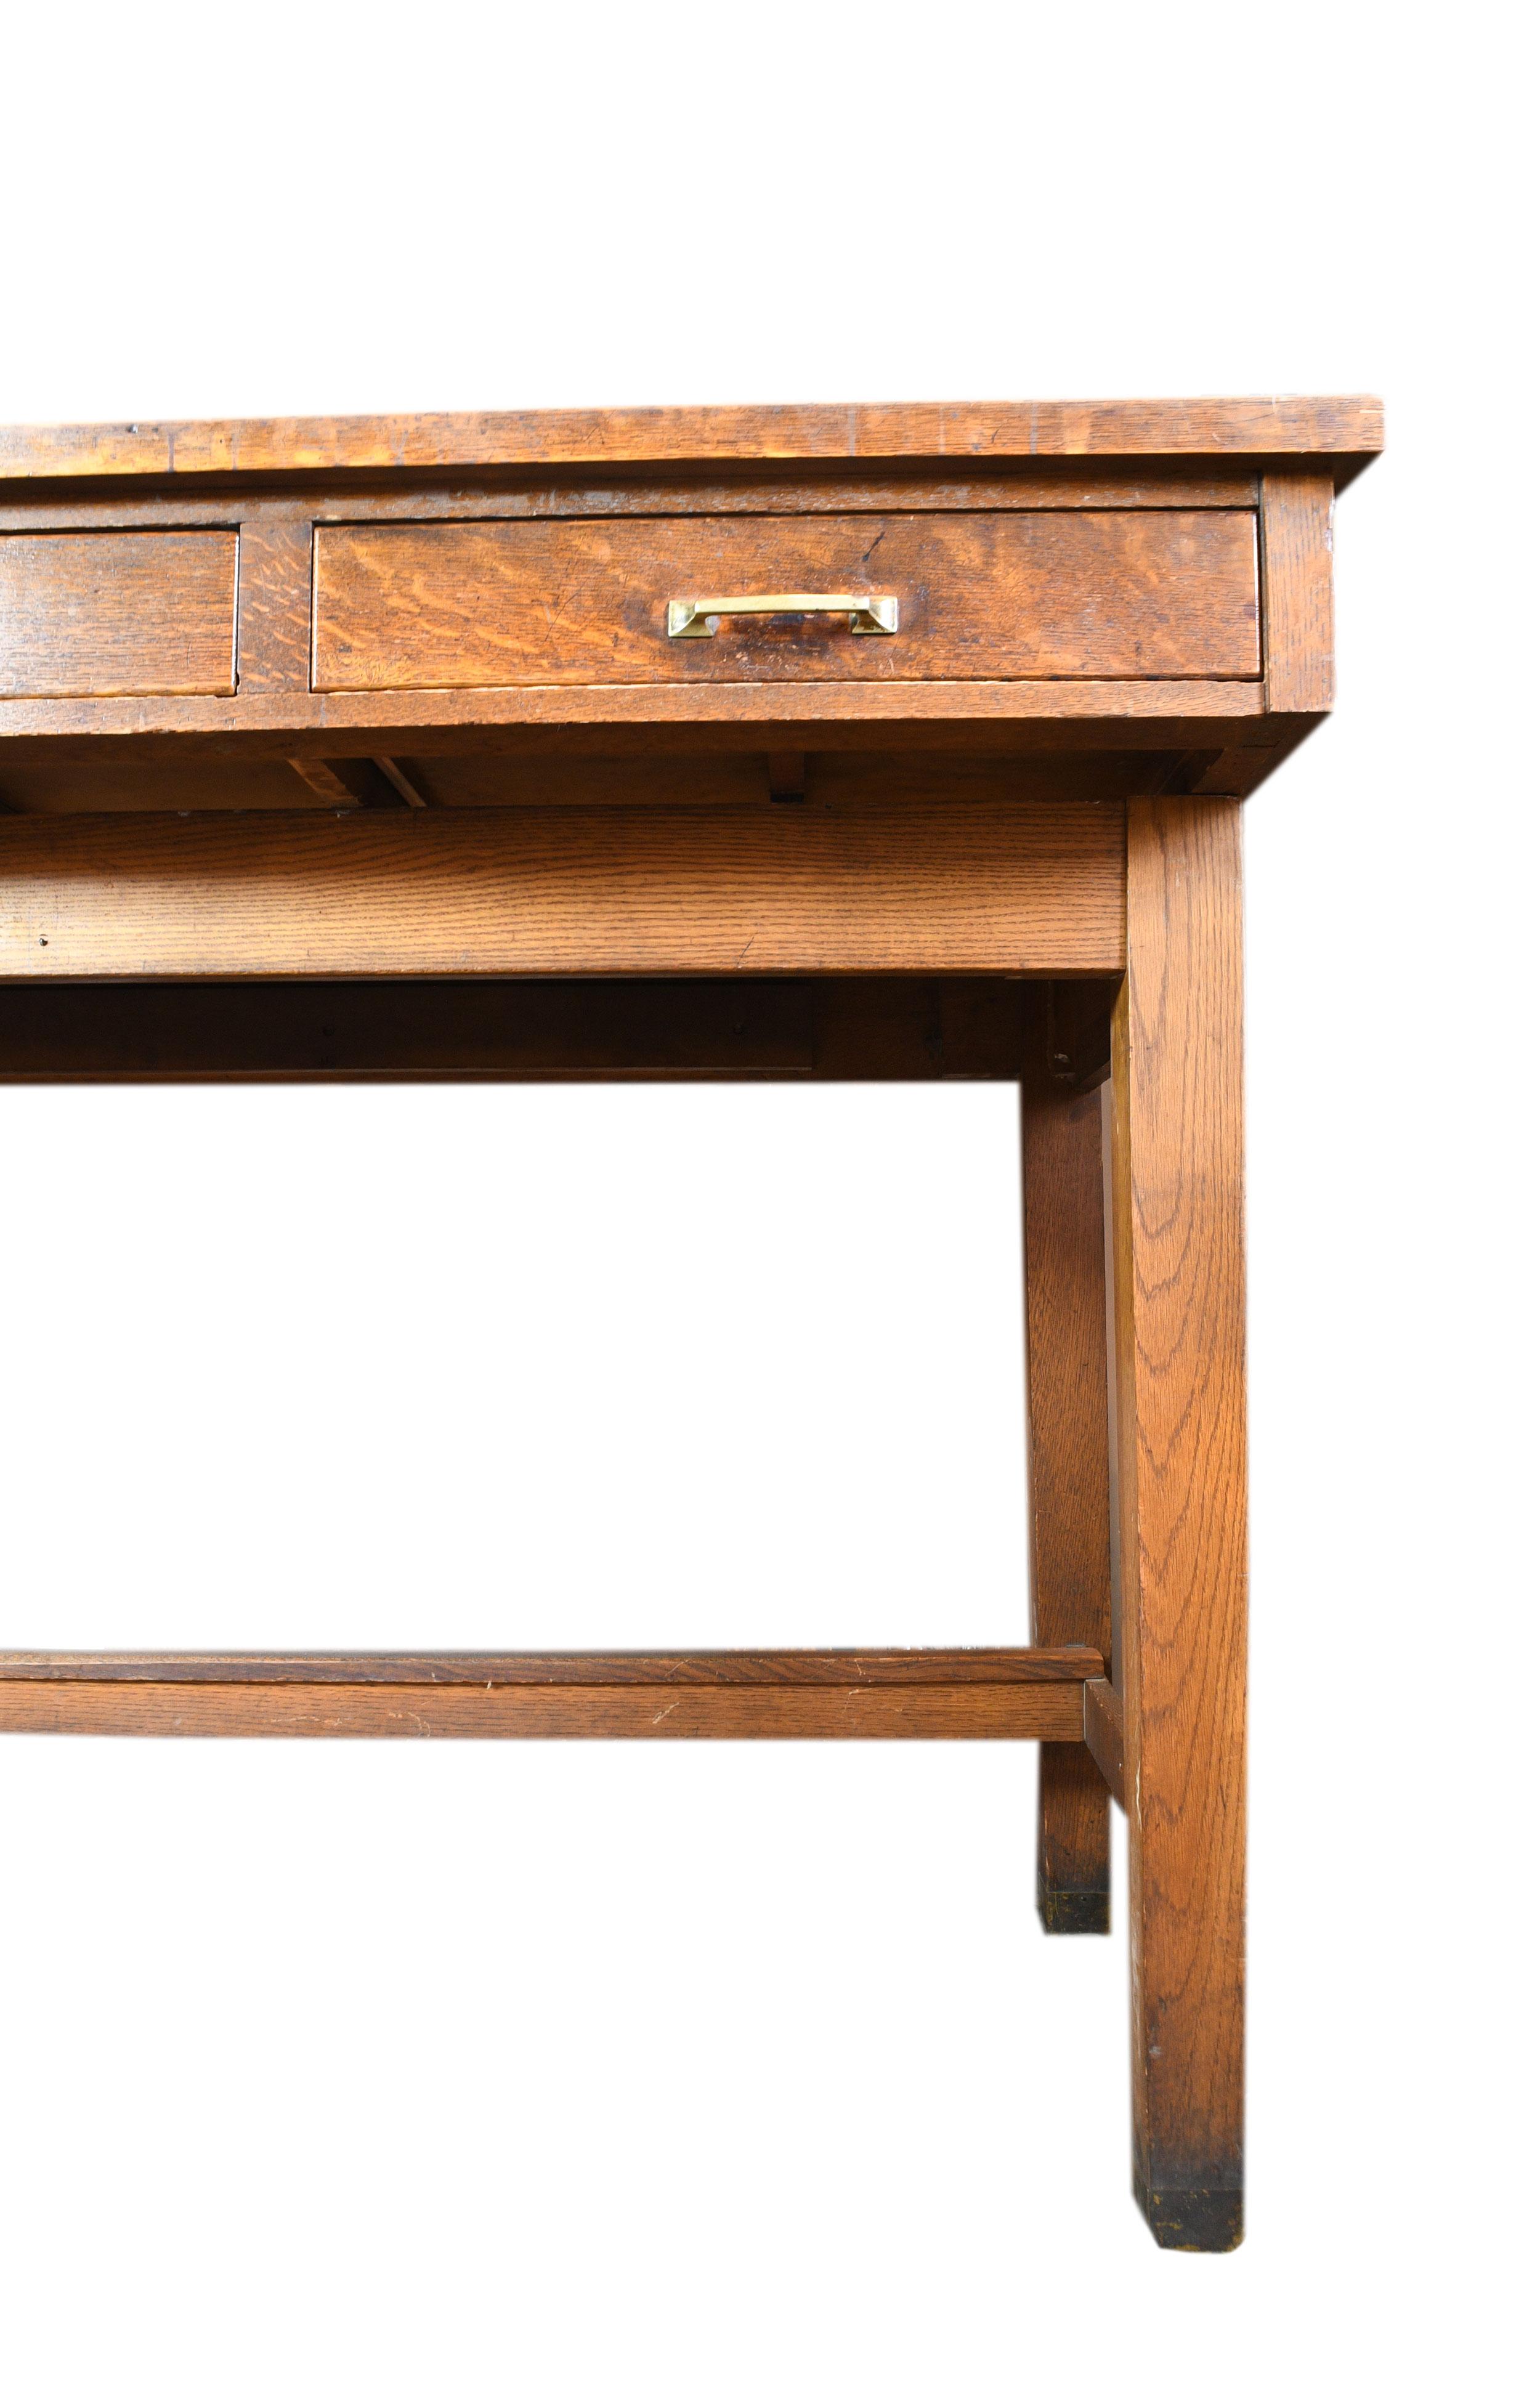 This enormous Leopold Desk Company standing desk is made of lovely oak and features four deep drawers affording ample storage space. The Leopold Desk Company was an office furniture manufacturing firm in Burlington, Iowa. In it’s prime, the company